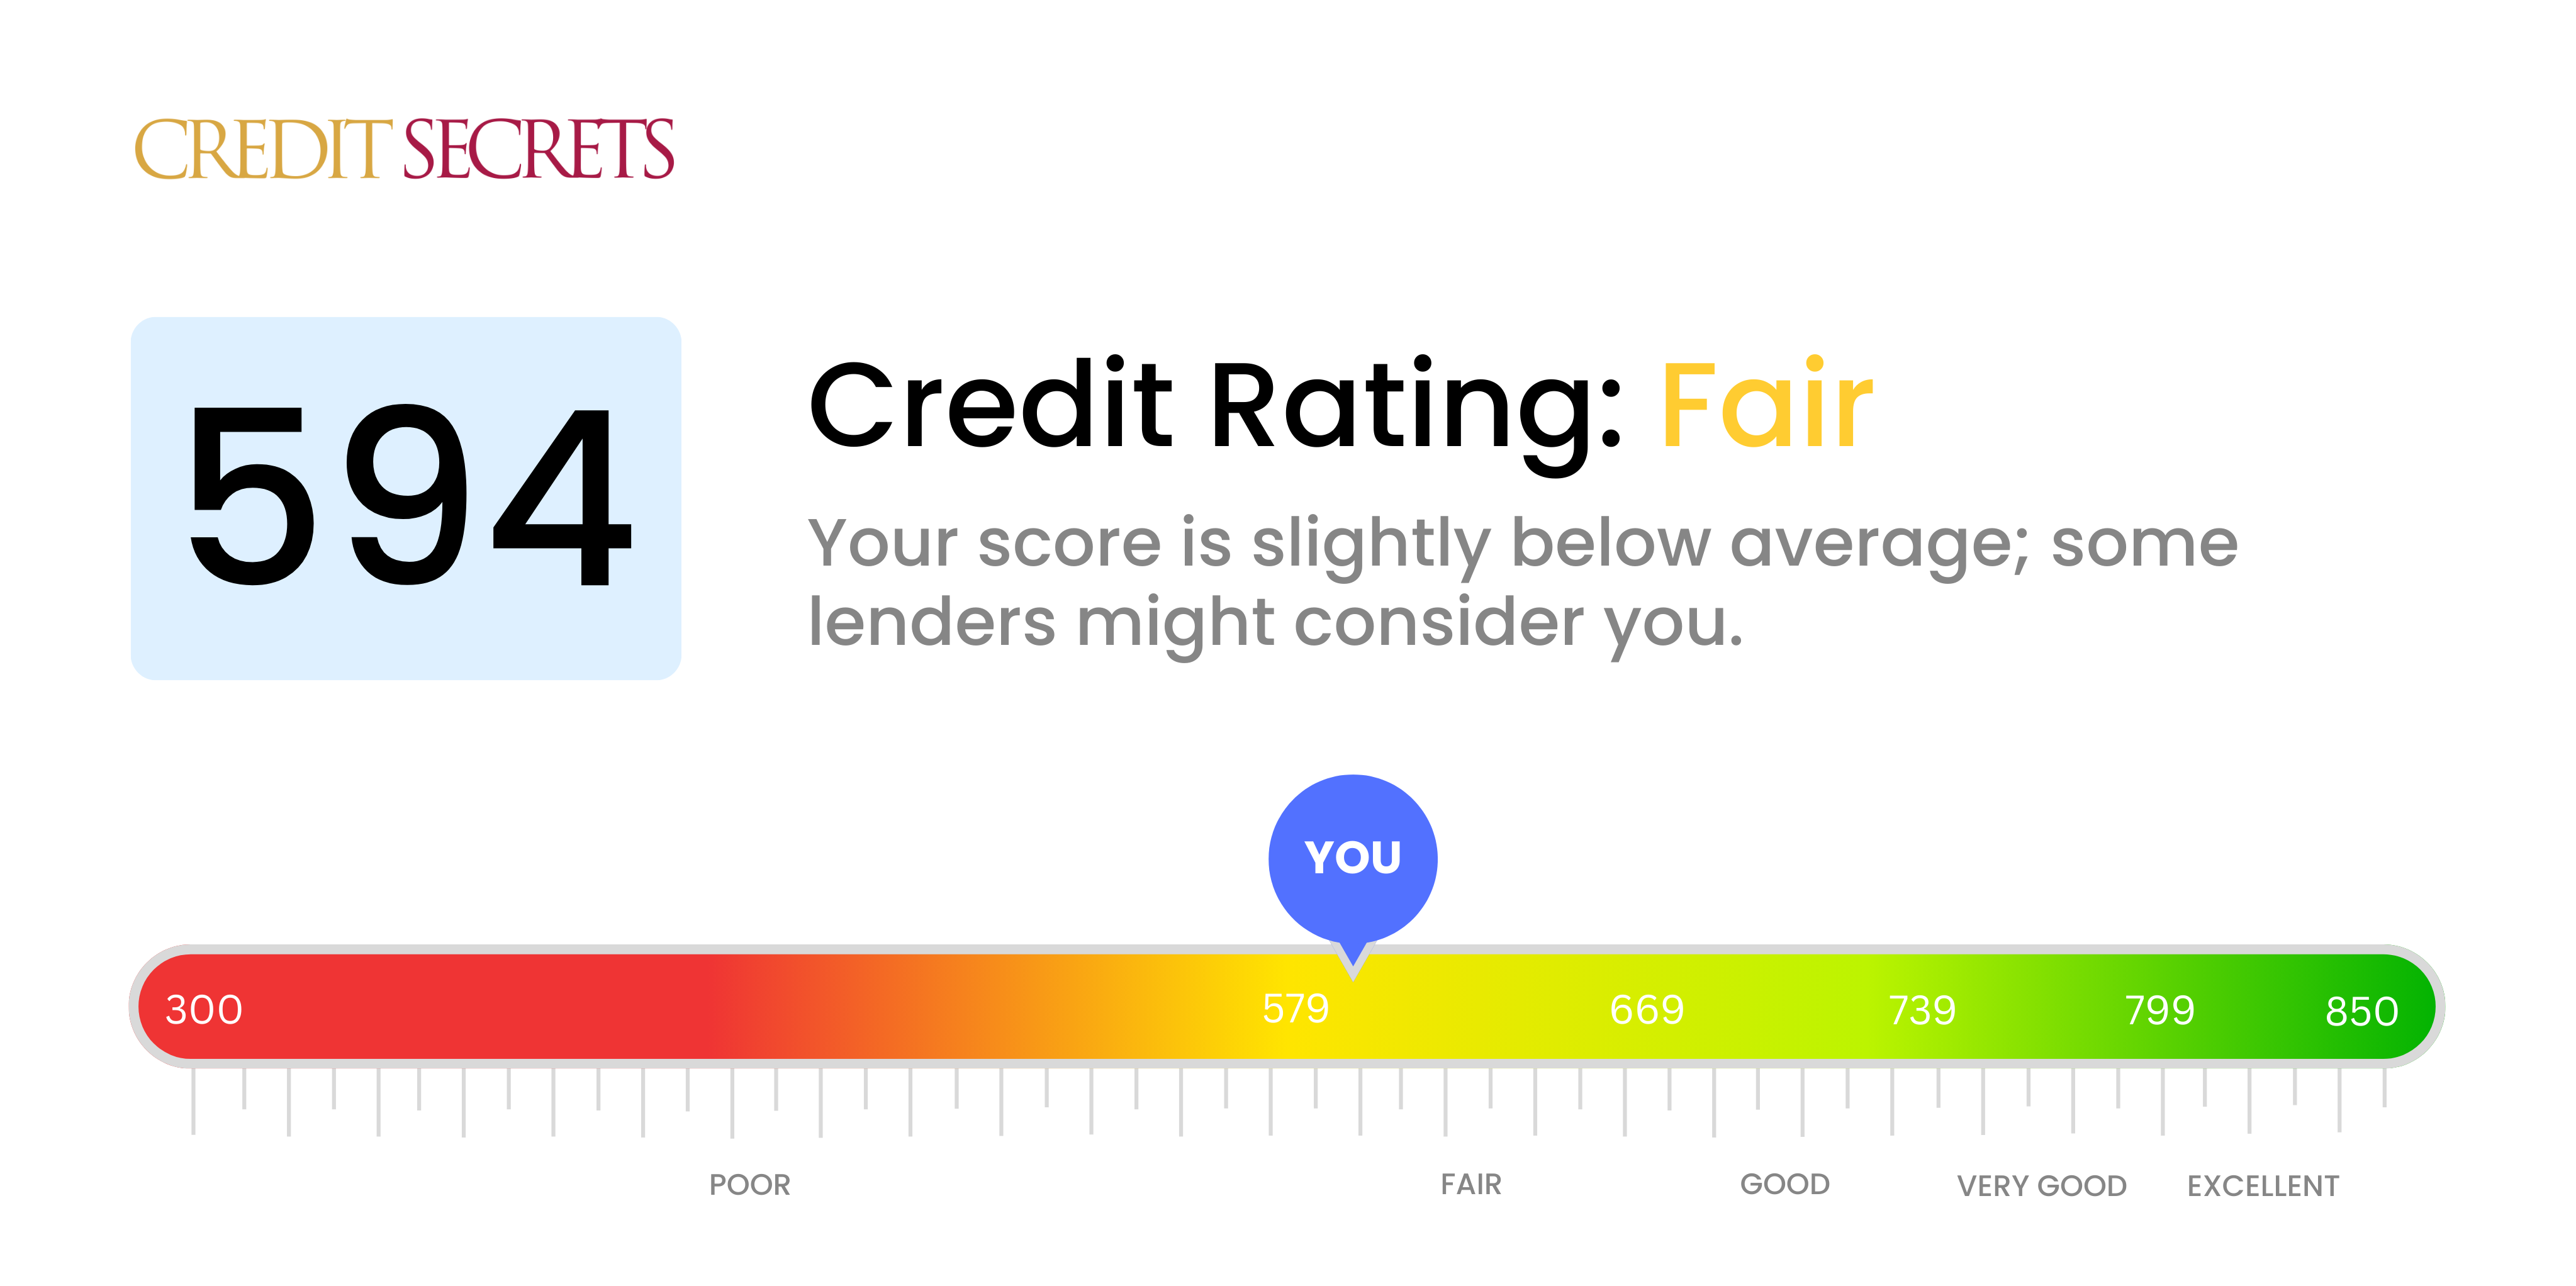 Is 594 a good credit score?